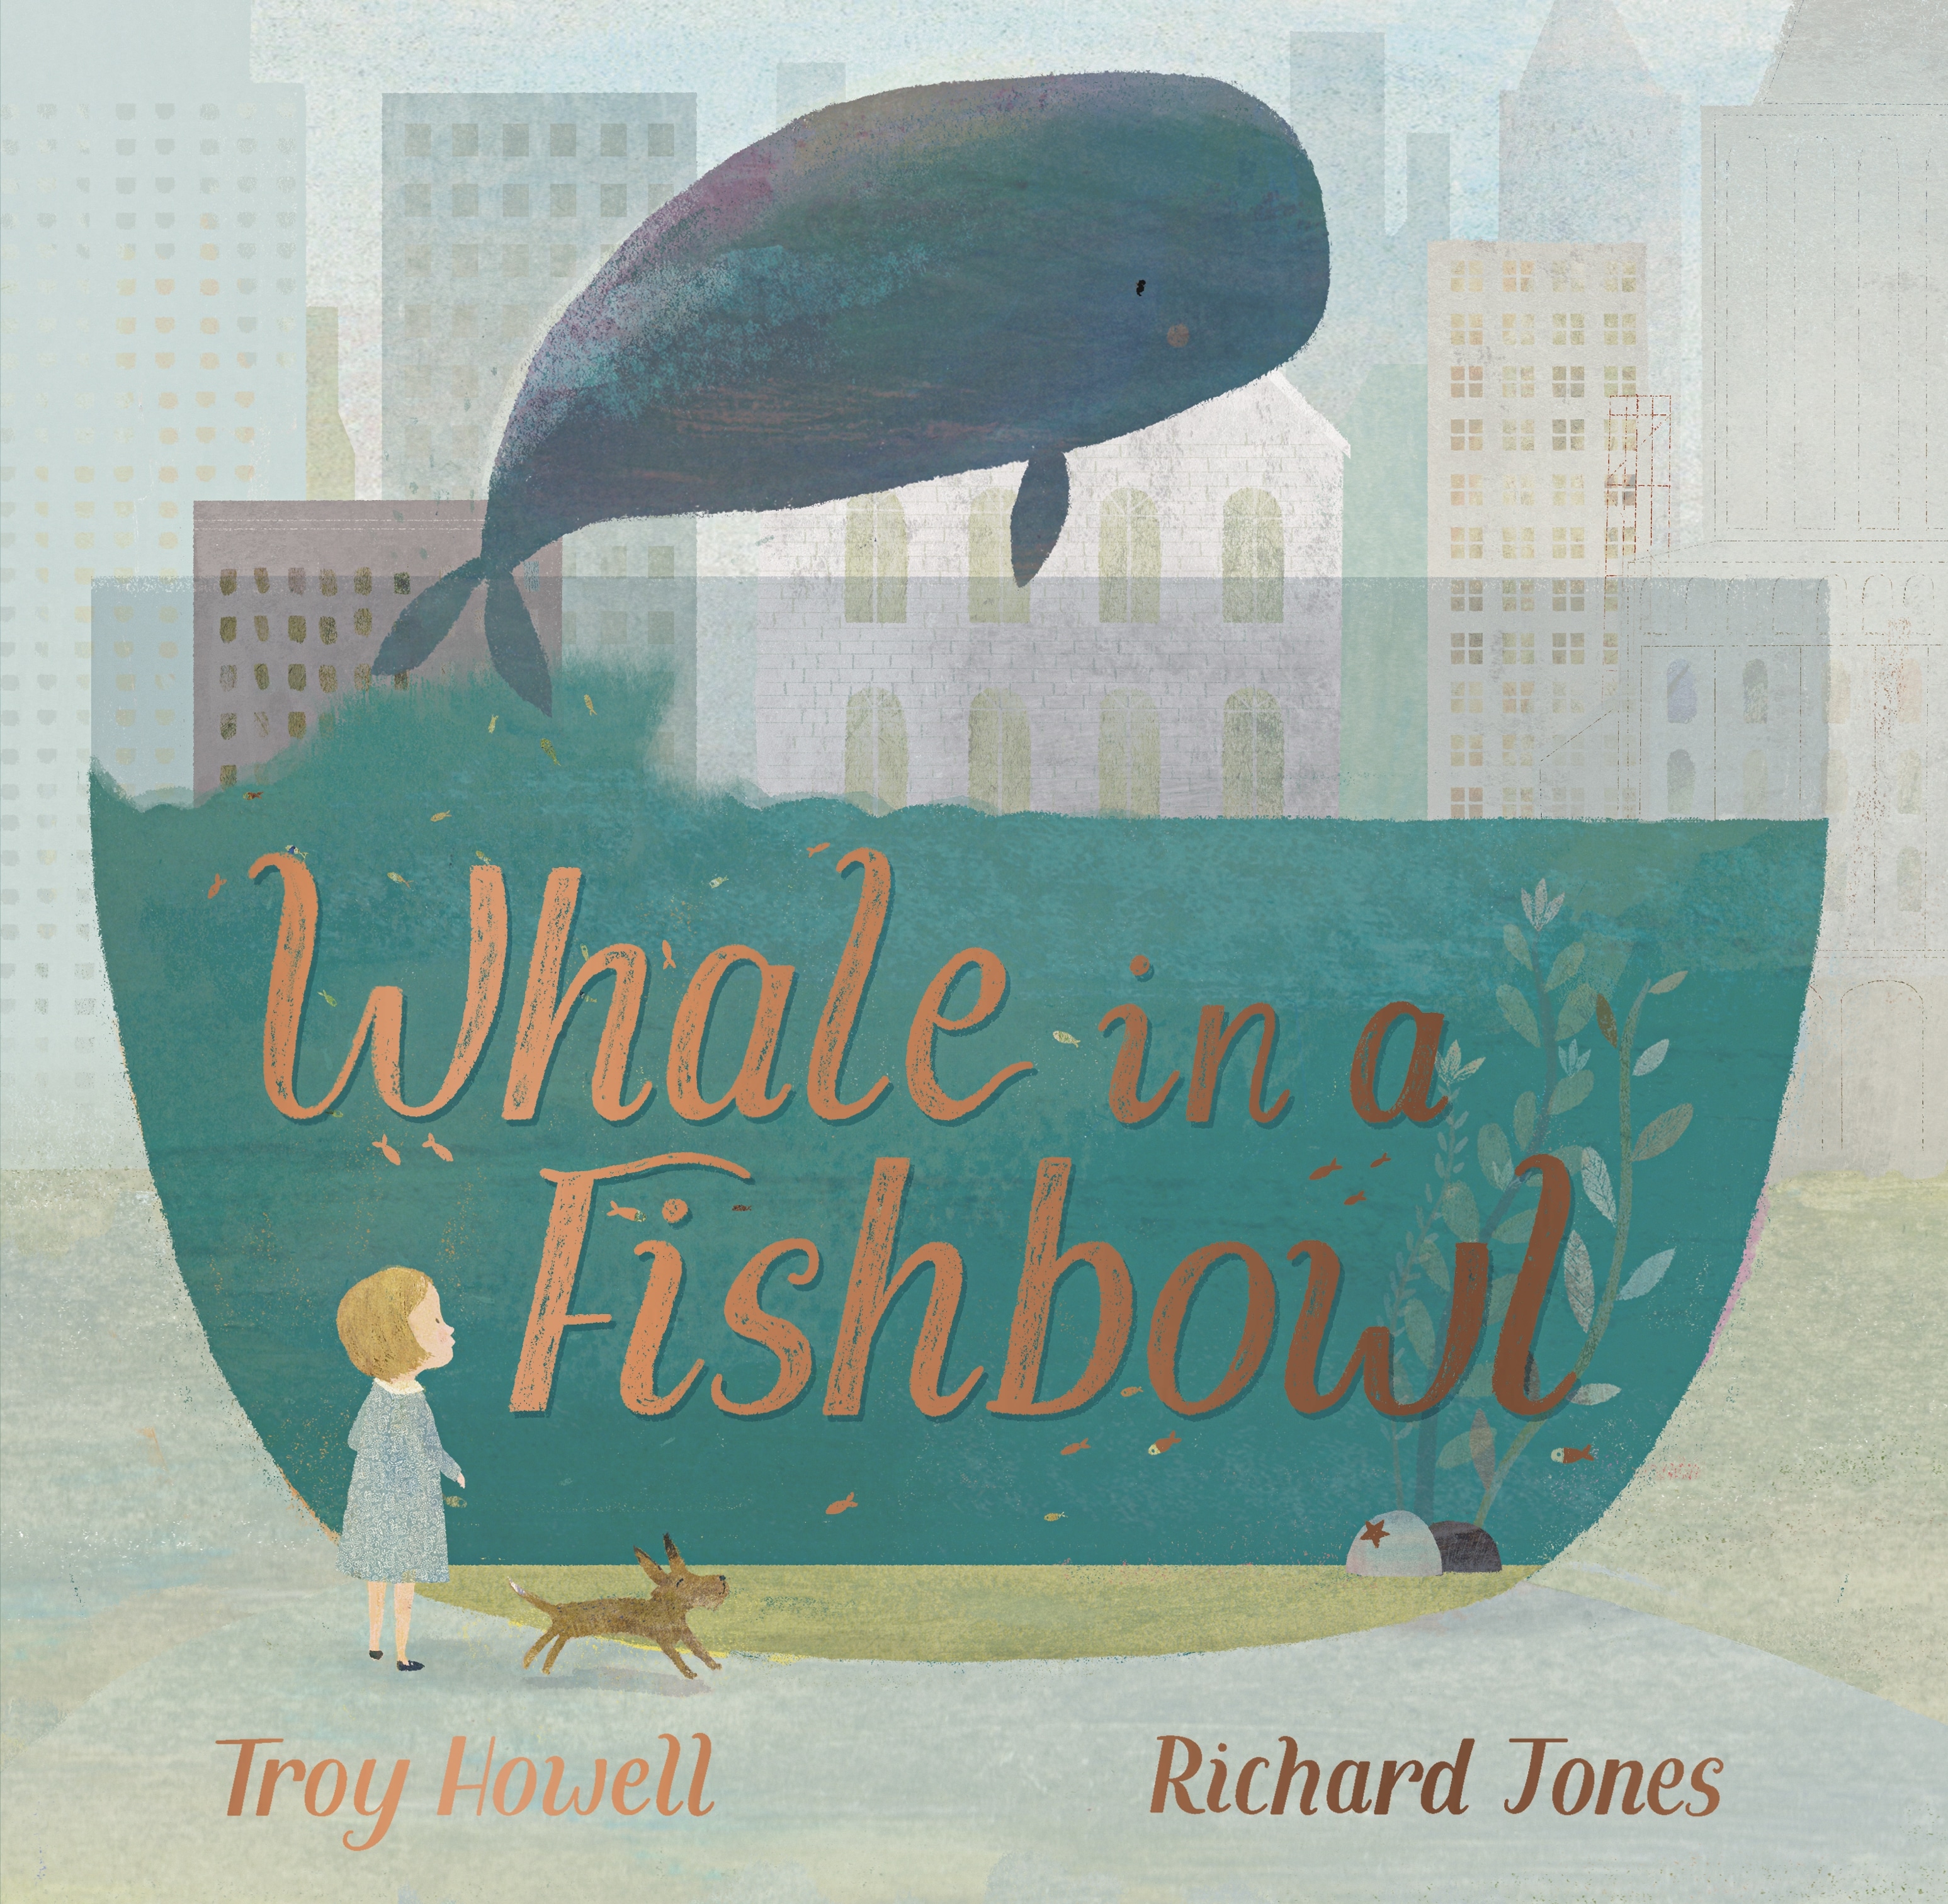 Book “Whale in a Fishbowl” by Troy Howell, Richard Jones — August 6, 2020